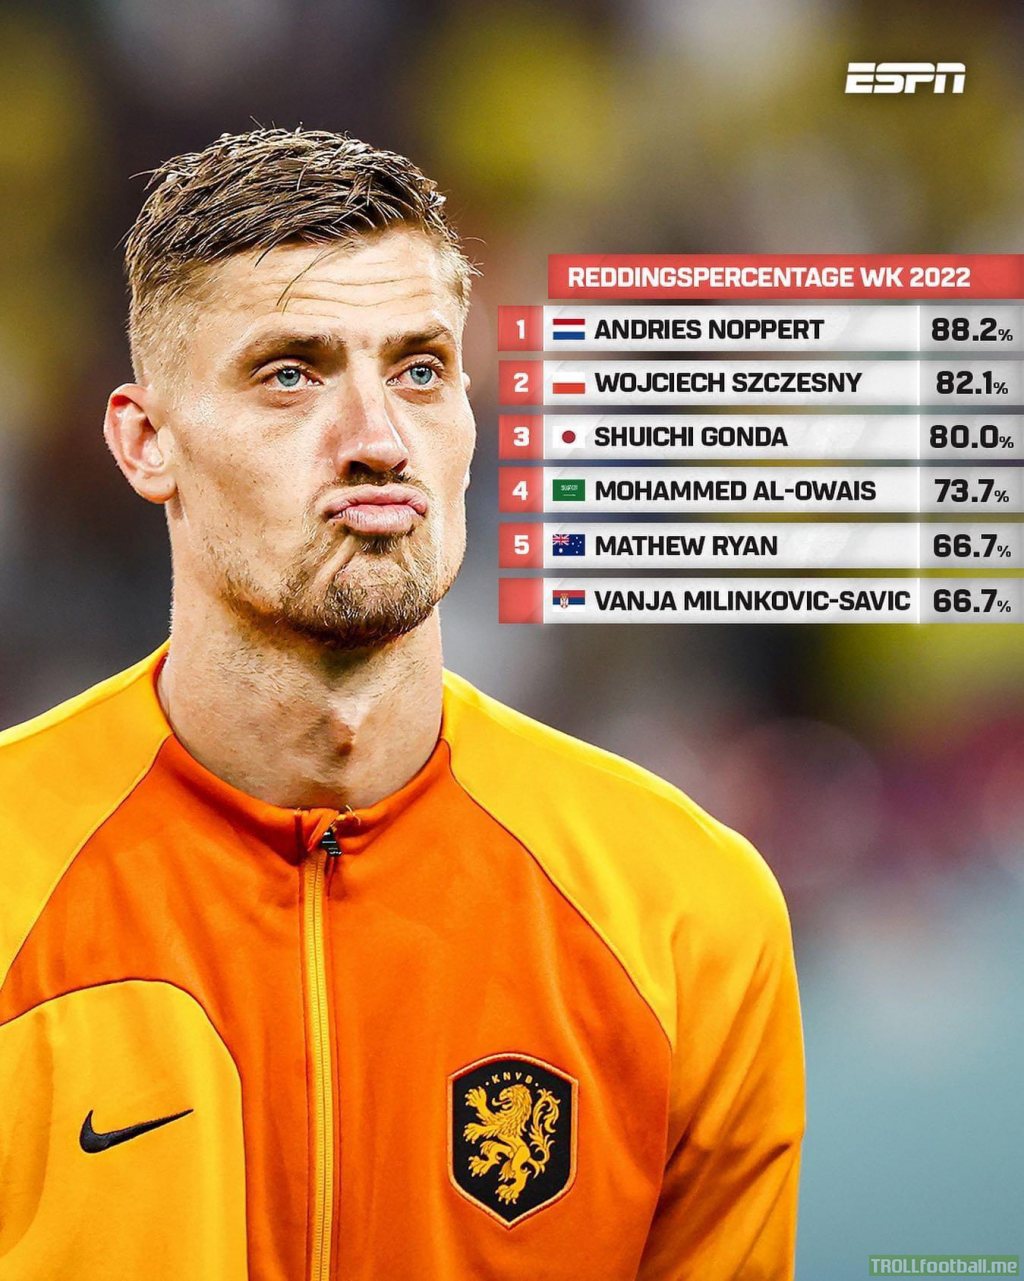 Highest save % of the world cup so far